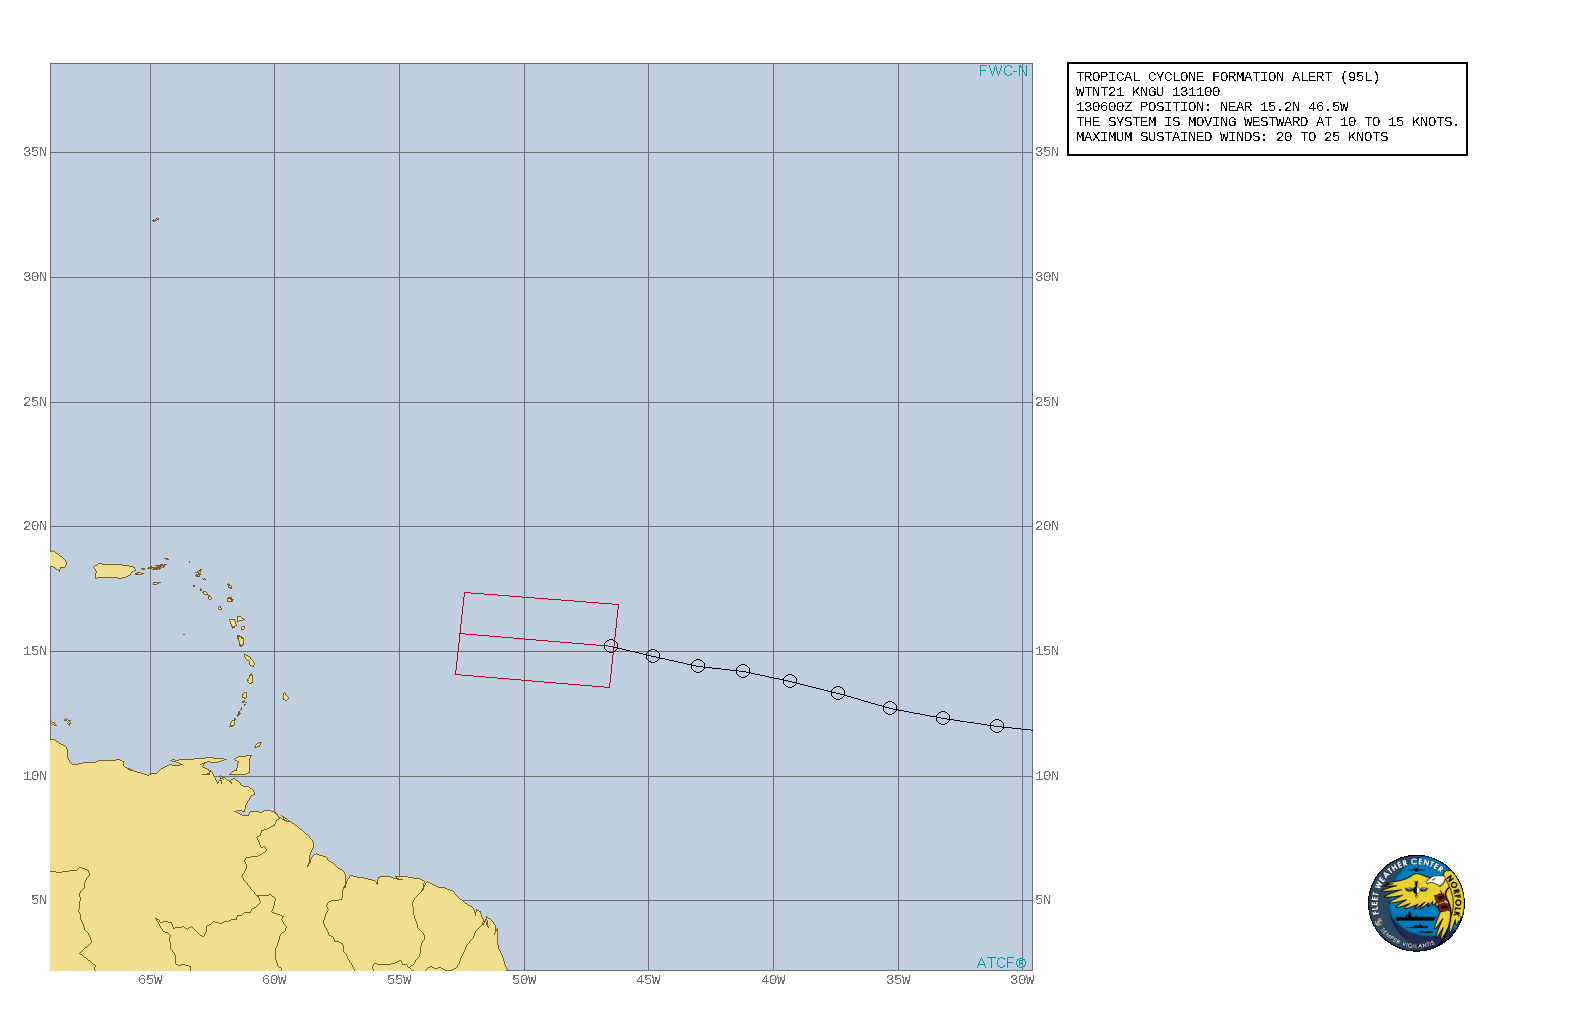 INVEST 95L. TROPICAL CYCLONE FORMATION ALERT ISSUED AT 13/11UTC.FORMATION OF A SIGNIFICANT TROPICAL CYCLONE IS POSSIBLE WITHIN 100 NM EITHER SIDE OF A LINE FROM 15.2N 46.5W TO 15.7N 52.6W WITHIN THE NEXT 24 HOURS. AVAILABLE DATA DOES NOT JUSTIFY ISSUANCE OF NUMBERED TROPICAL CYCLONE WARNINGS AT THIS TIME. WINDS IN THE AREA ARE ESTIMATED TO BE 20 TO 25 KNOTS. METSAT IMAGERY AT 130600UTC INDICATES THAT A CIRCULATION CENTER IS LOCATED NEAR 15.2N 46.5W. 2. SHOWERS AND THUNDERSTORMS HAVE BECOME MORE CONCETRATED DURING THE PAST FEW HOURS NEAR THE SURFACE CENTER OF A SMALL LOW PRESSURE SYSTEM LOCATED ABOUT 900 MILES EAST OF THE LESSER ANTILLES. ENVIRONMENTAL CONDITIONS ARE MARGINALLY CONDUCIVE FOR FURTHER DEVELOPMENT, AND A TROPICAL DEPRESSION IS LIKELY TO FORM TODAY WHILE THE SYSTEM MOVES WESTWARD AT 10-15 KNOTS. THE DISTURBANCE IS FORECAST TO APPROACH THE NORTHERN LESSER ANTILLES BY SATURDAY NIGHT.